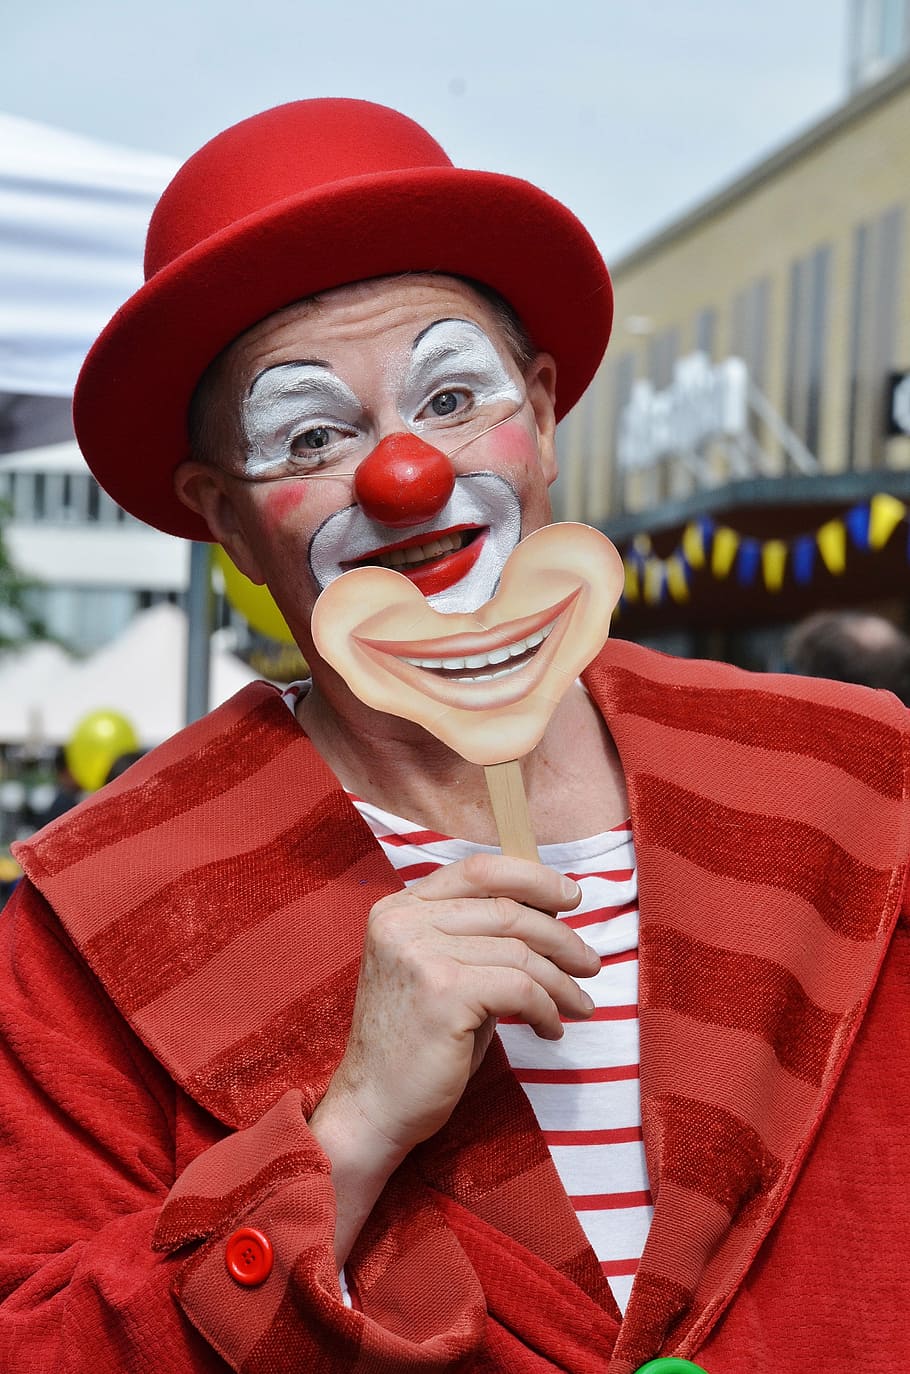 person, wearing, clown costume, clown, comedian, nose, circus, funny, laugh, make-up